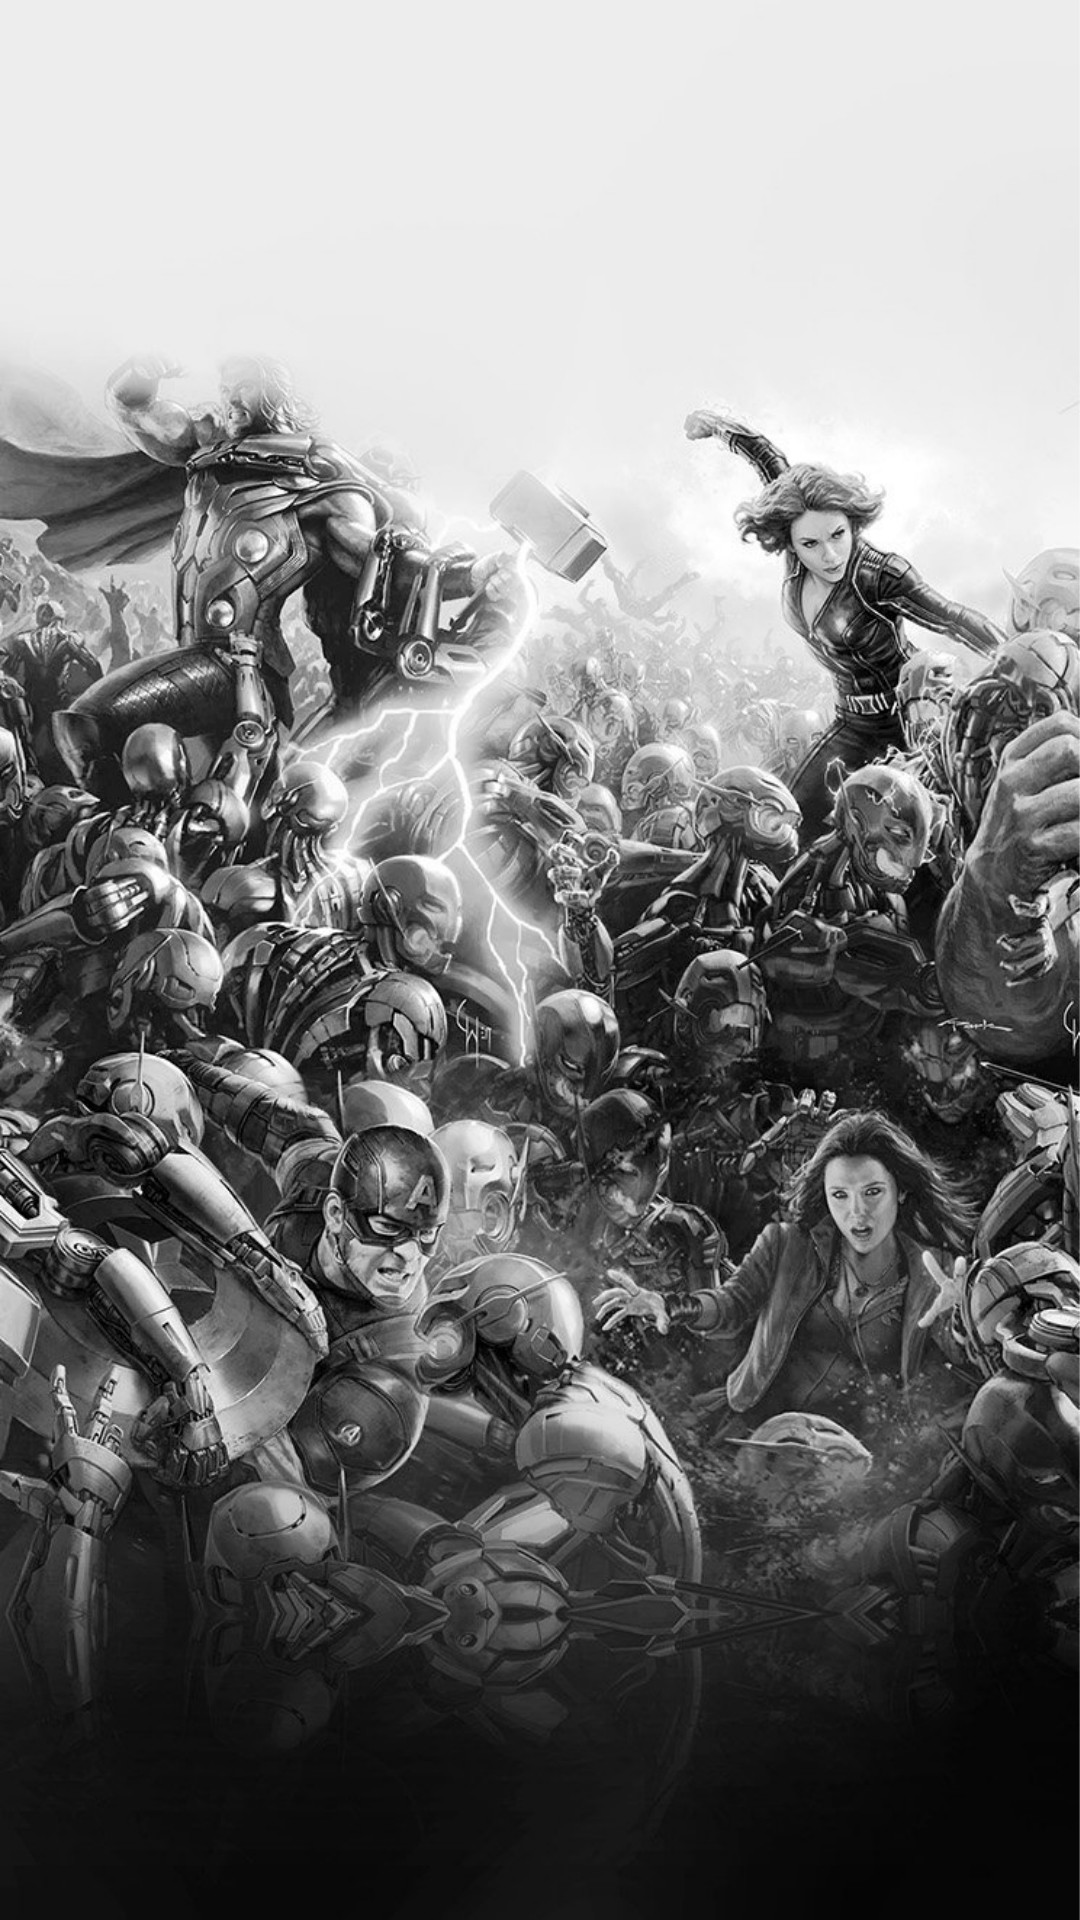 Download Wallpaper 1920×1080 Avengers age of ultron, Marvel Download Wallpaper Pinterest Avengers wallpaper, Wallpaper and Wallpaper downloads